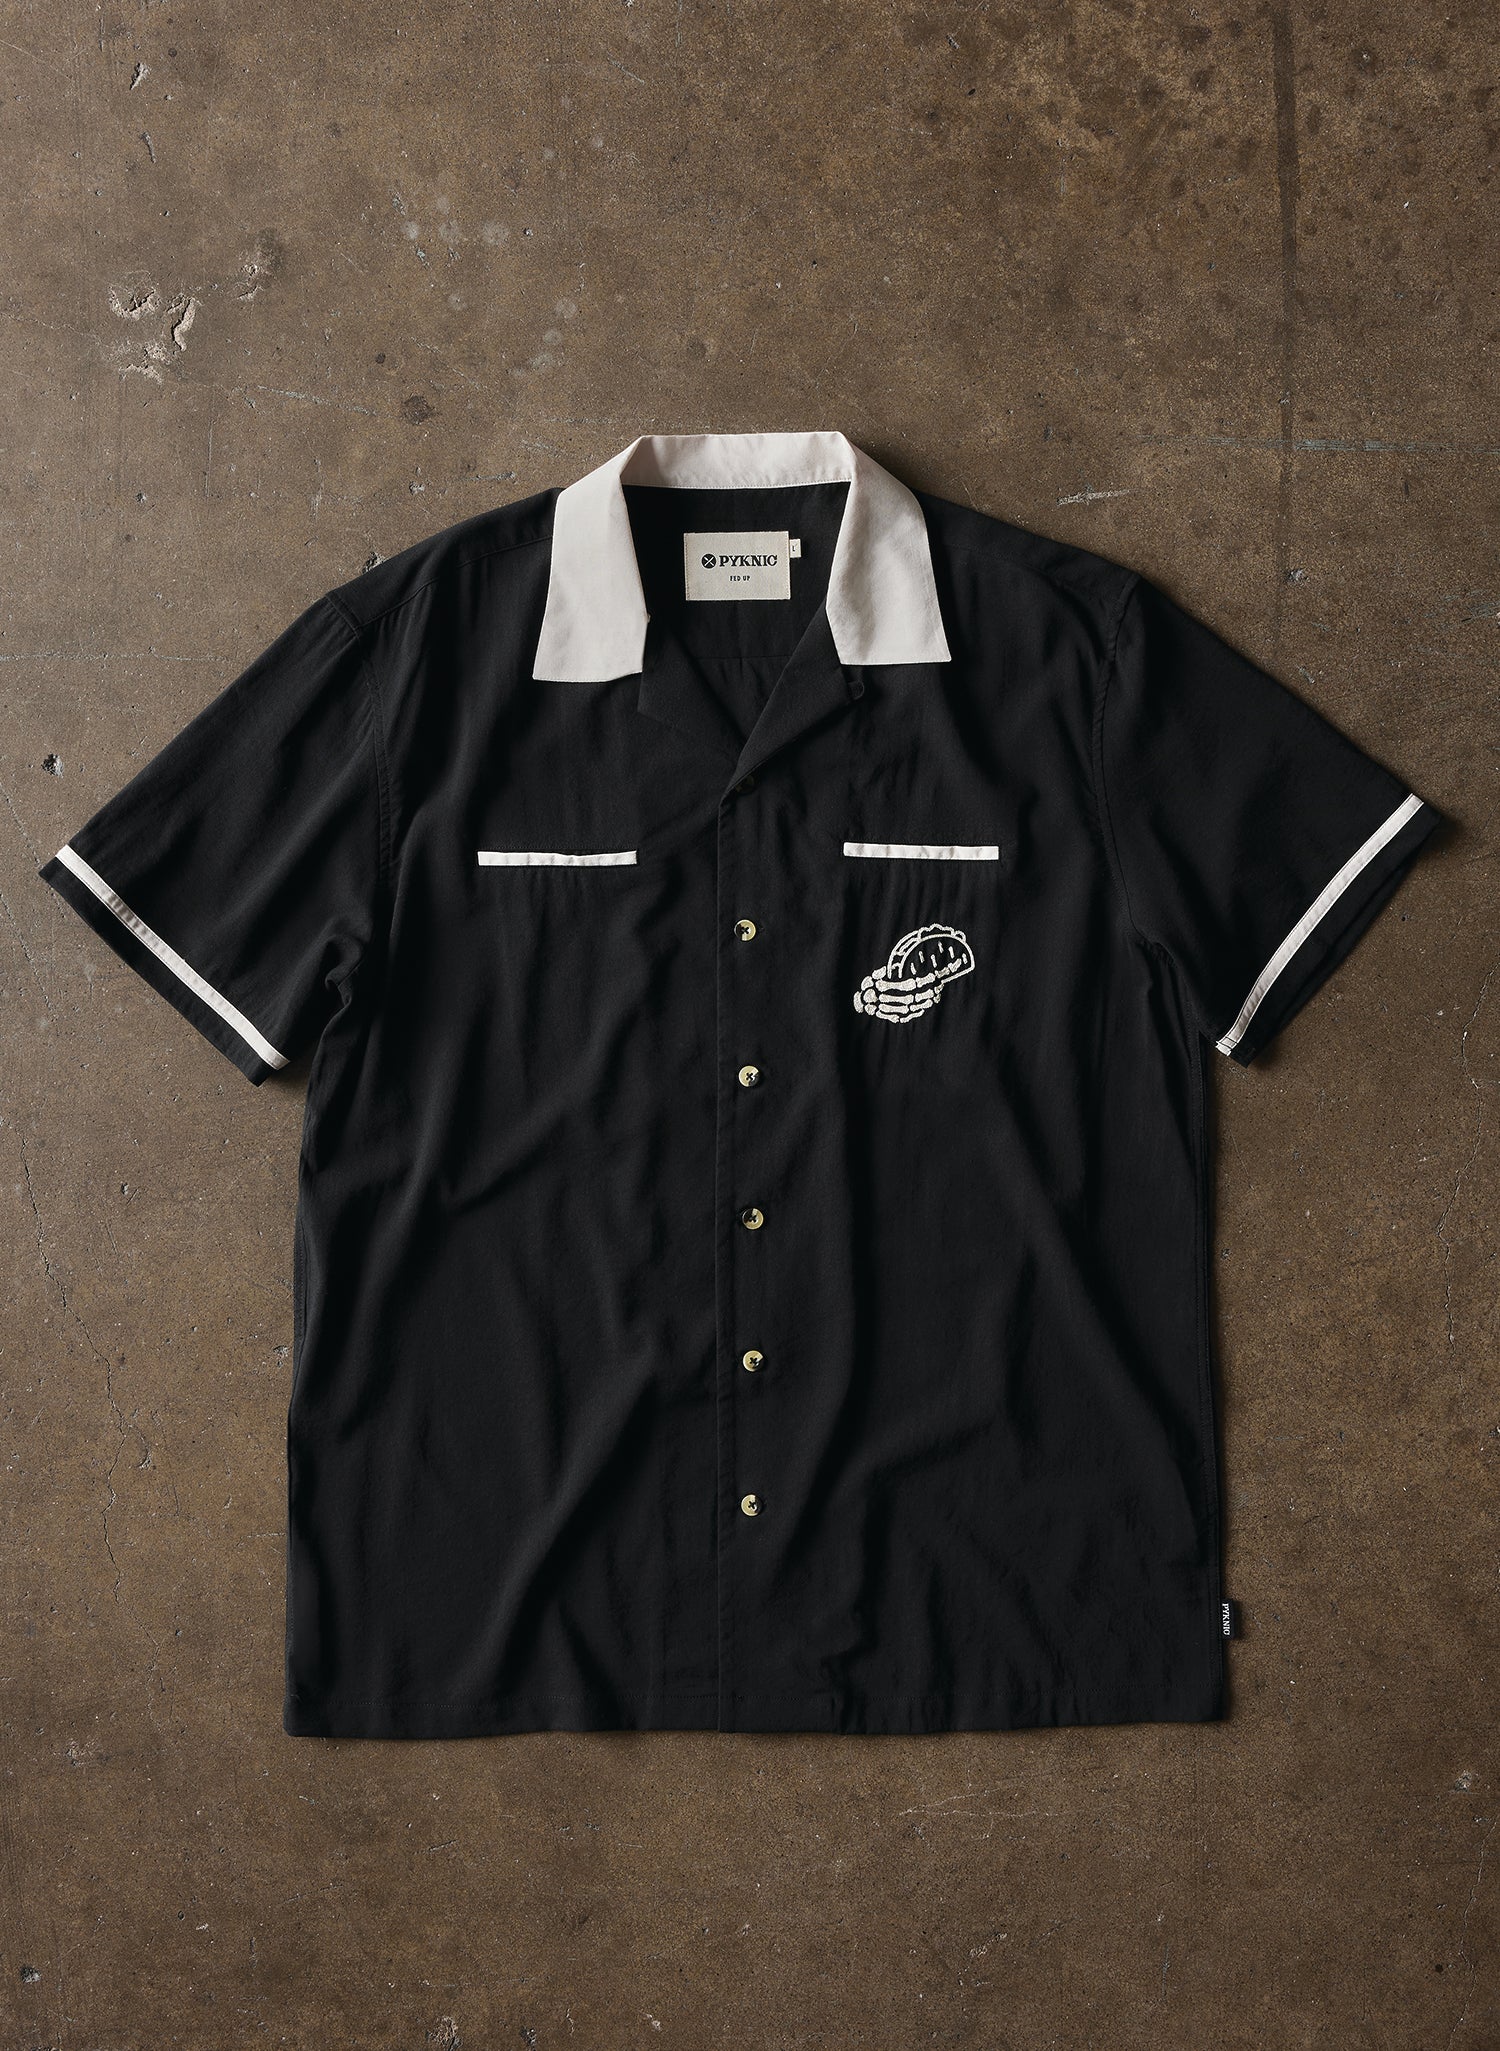 Pyknic | Black & Cream Bowling Shirt, Vacation Casual Button-Up Shirt | Button Down Shirt with Chainstitch Embroidery, Skeleton Hand Chain Stitch Taco Embroidery, Tacos & Beer Embroidered Shirt, Taco Lover Shirt, Best Foodie Shirt, Best Foodie Gift, Food Themed Apparel, Taco Shirt, Food Tattoo Flash